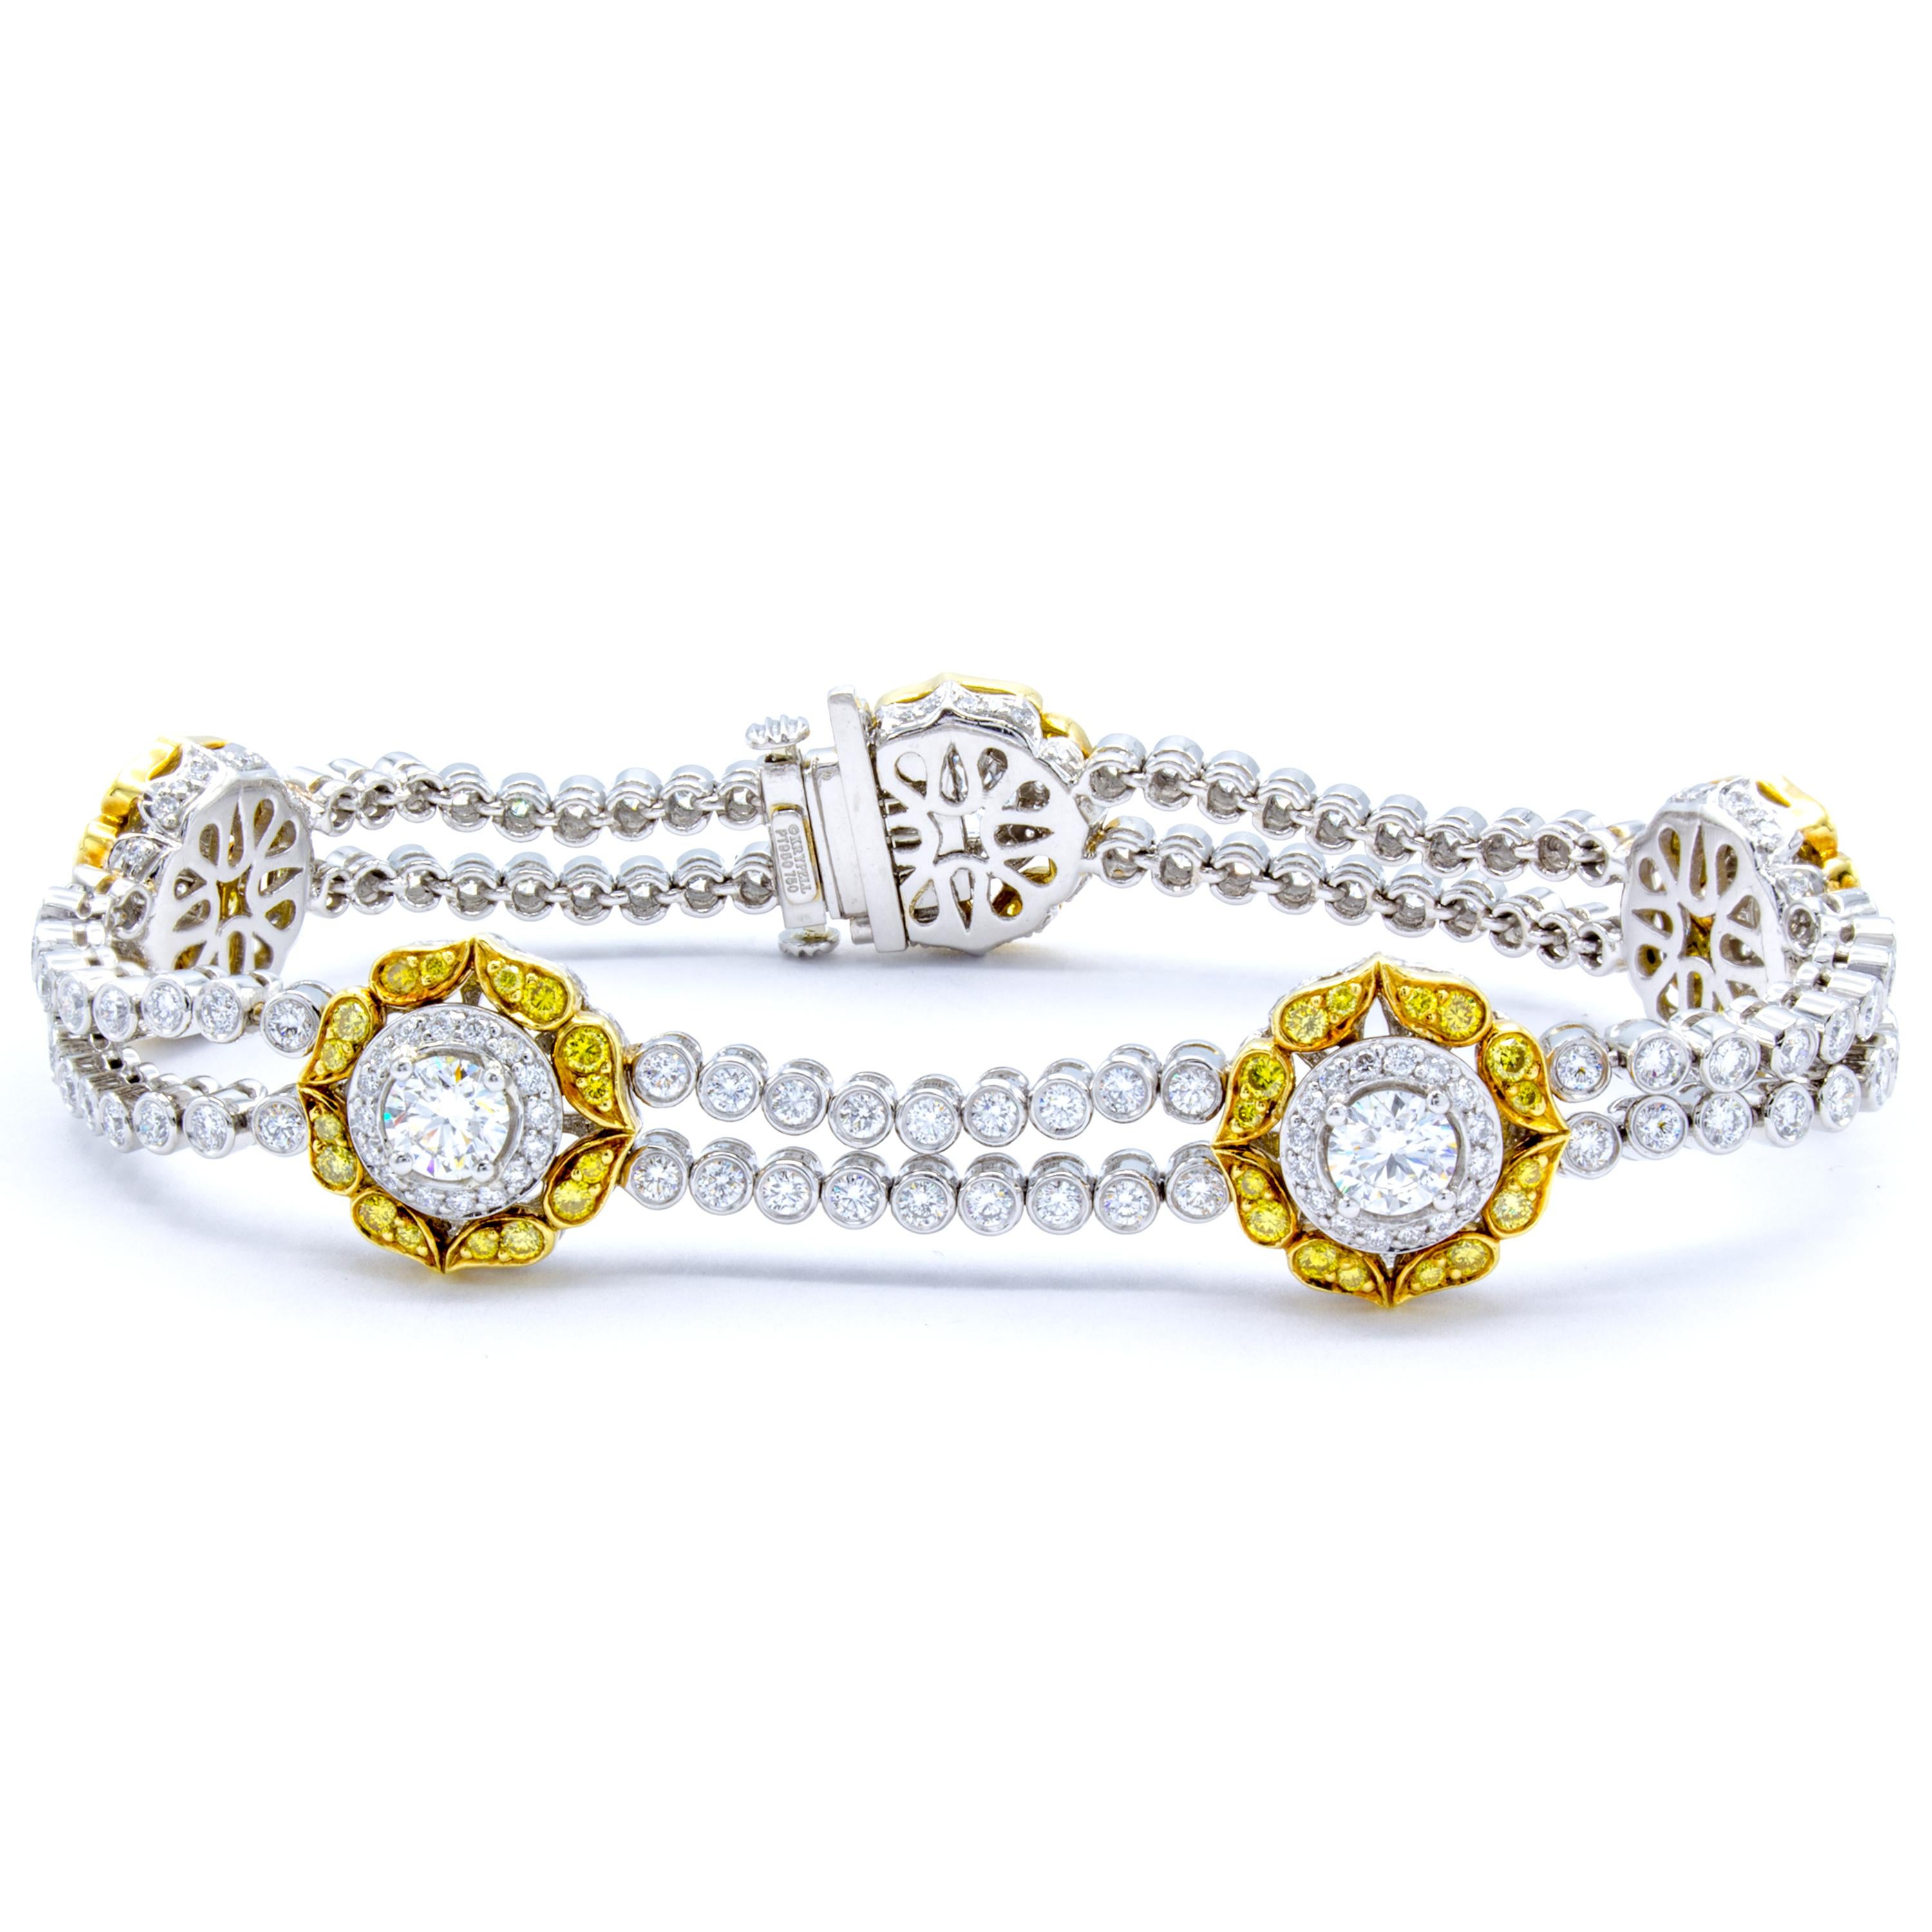 This delightful diamond bracelet features 5.77 carats of both exceptional white round brilliant diamonds and the remarkable color from natural fancy yellow round brilliants. An elegant design carries two symmetric rows in platinum connected by 18Kt